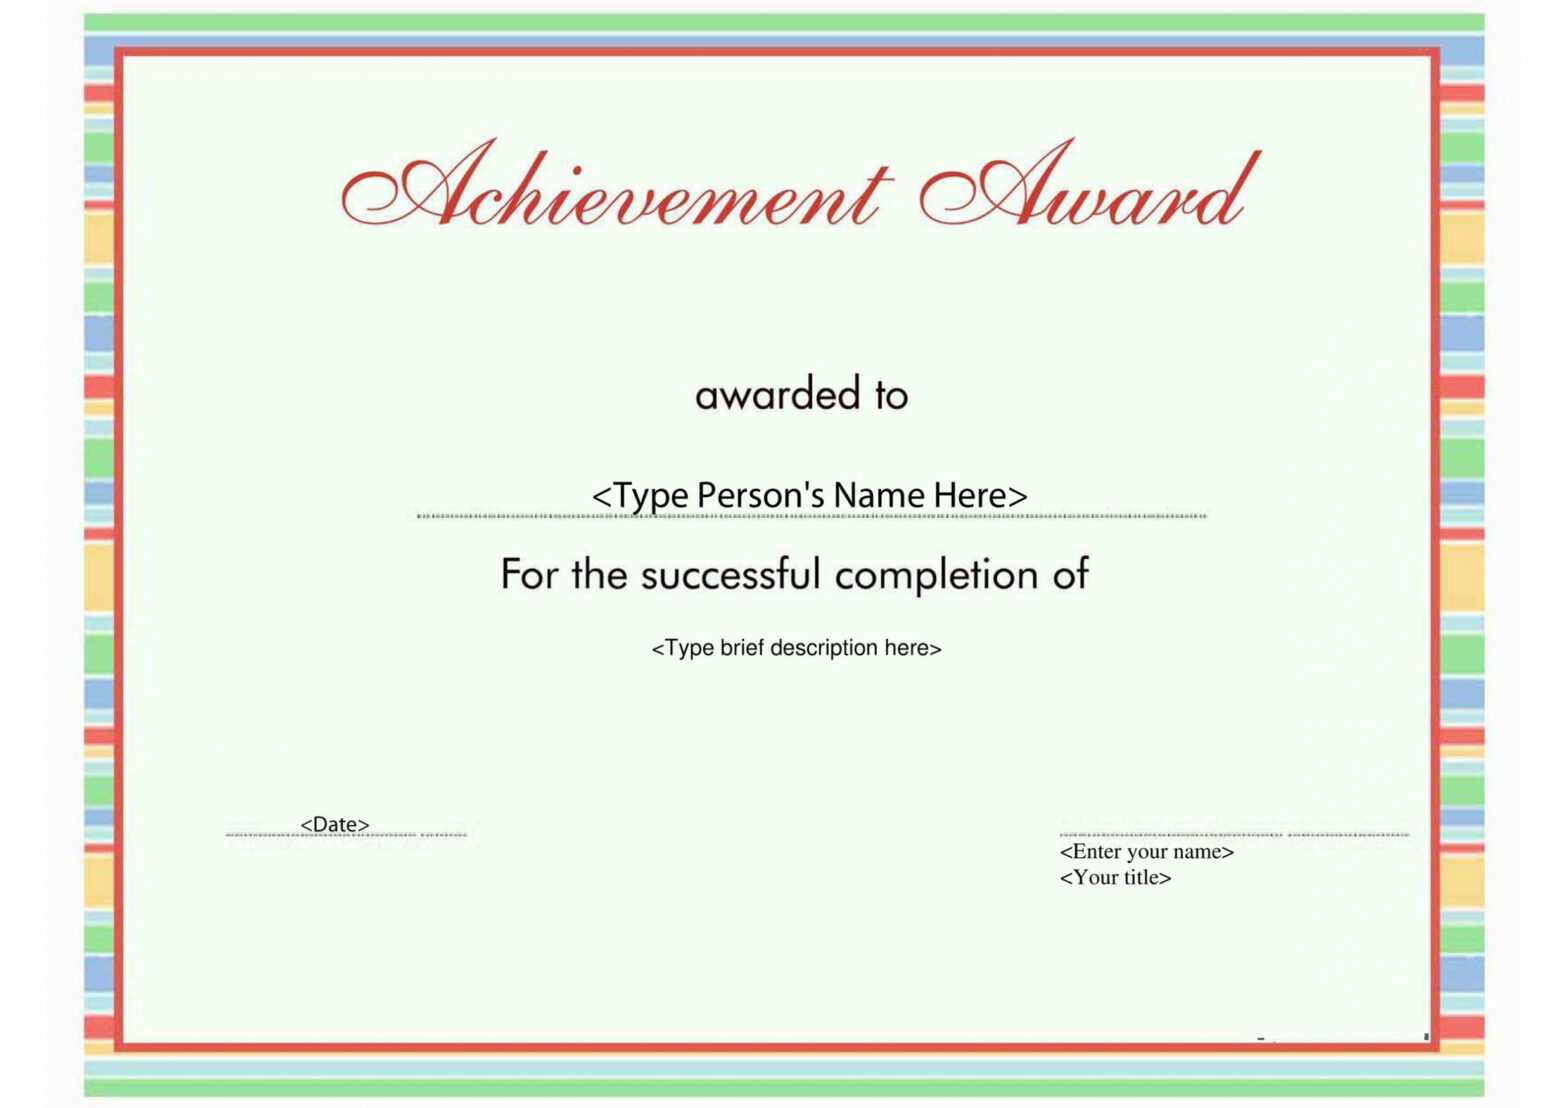 50 Amazing Award Certificate Templates ᐅ Templatelab intended for Best Performance Certificate Template